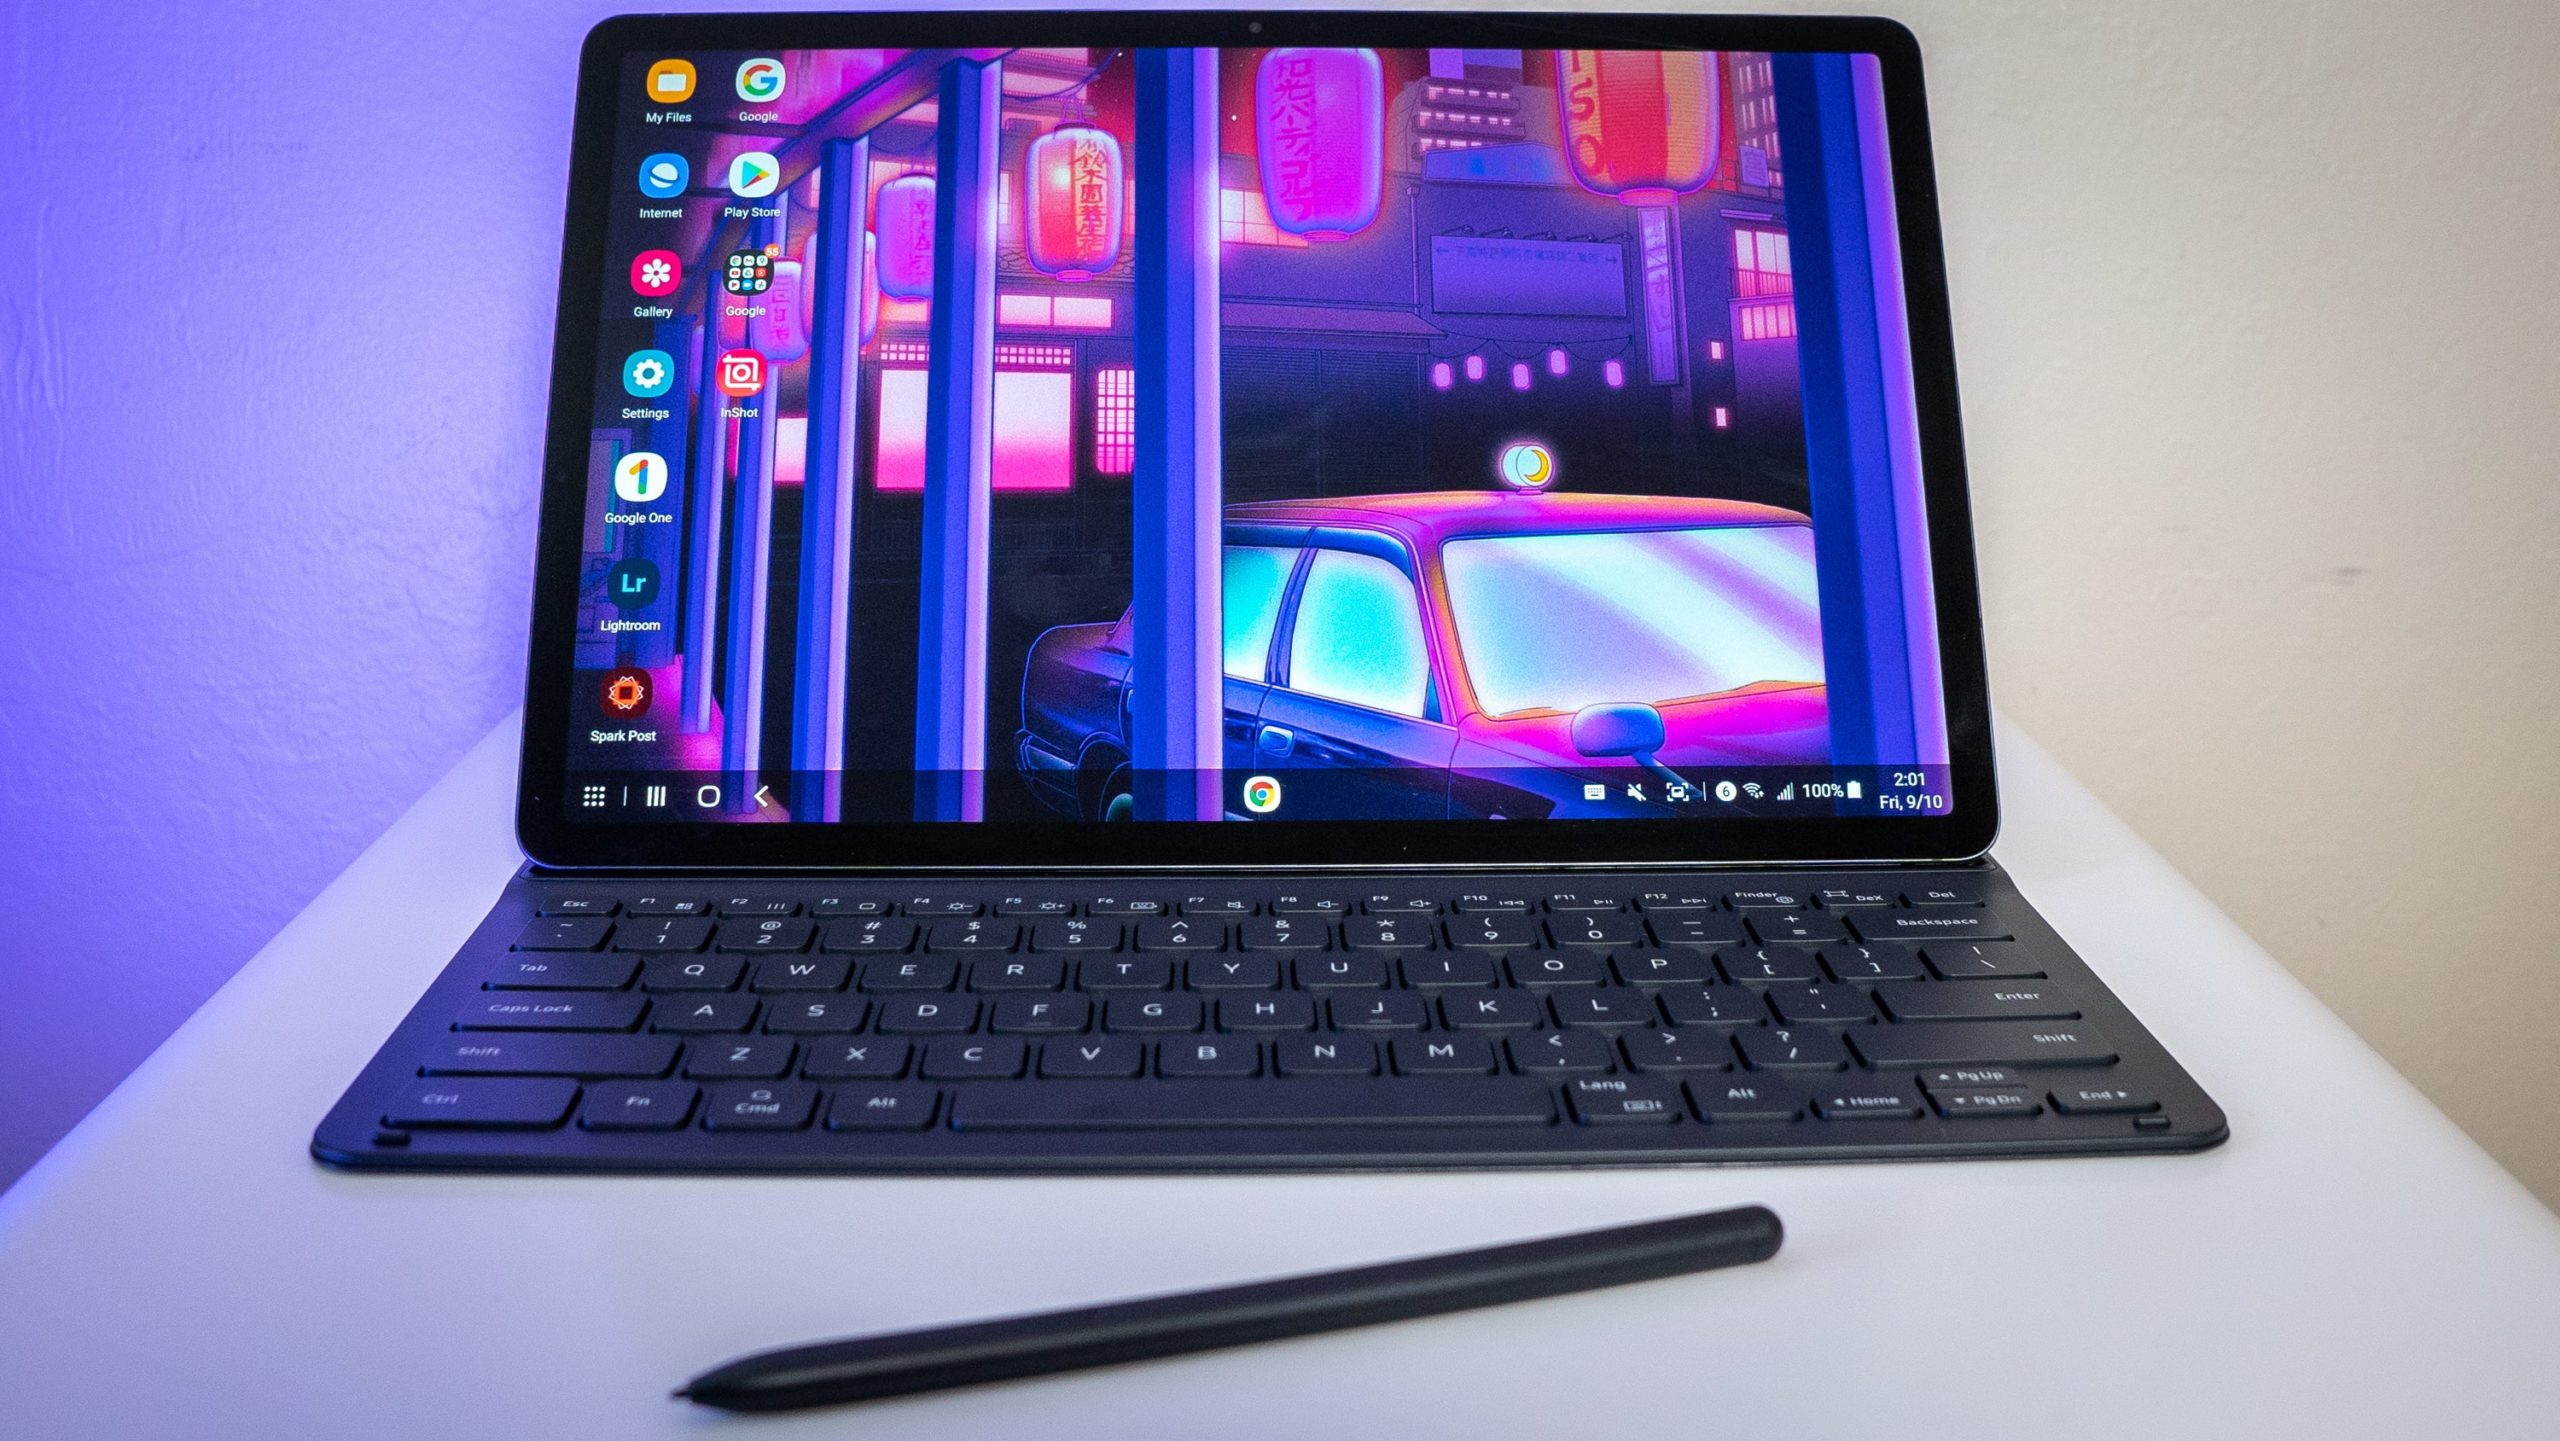 Samsung Galaxy Tab S6 Review: S Pen, DeX Mode, and More